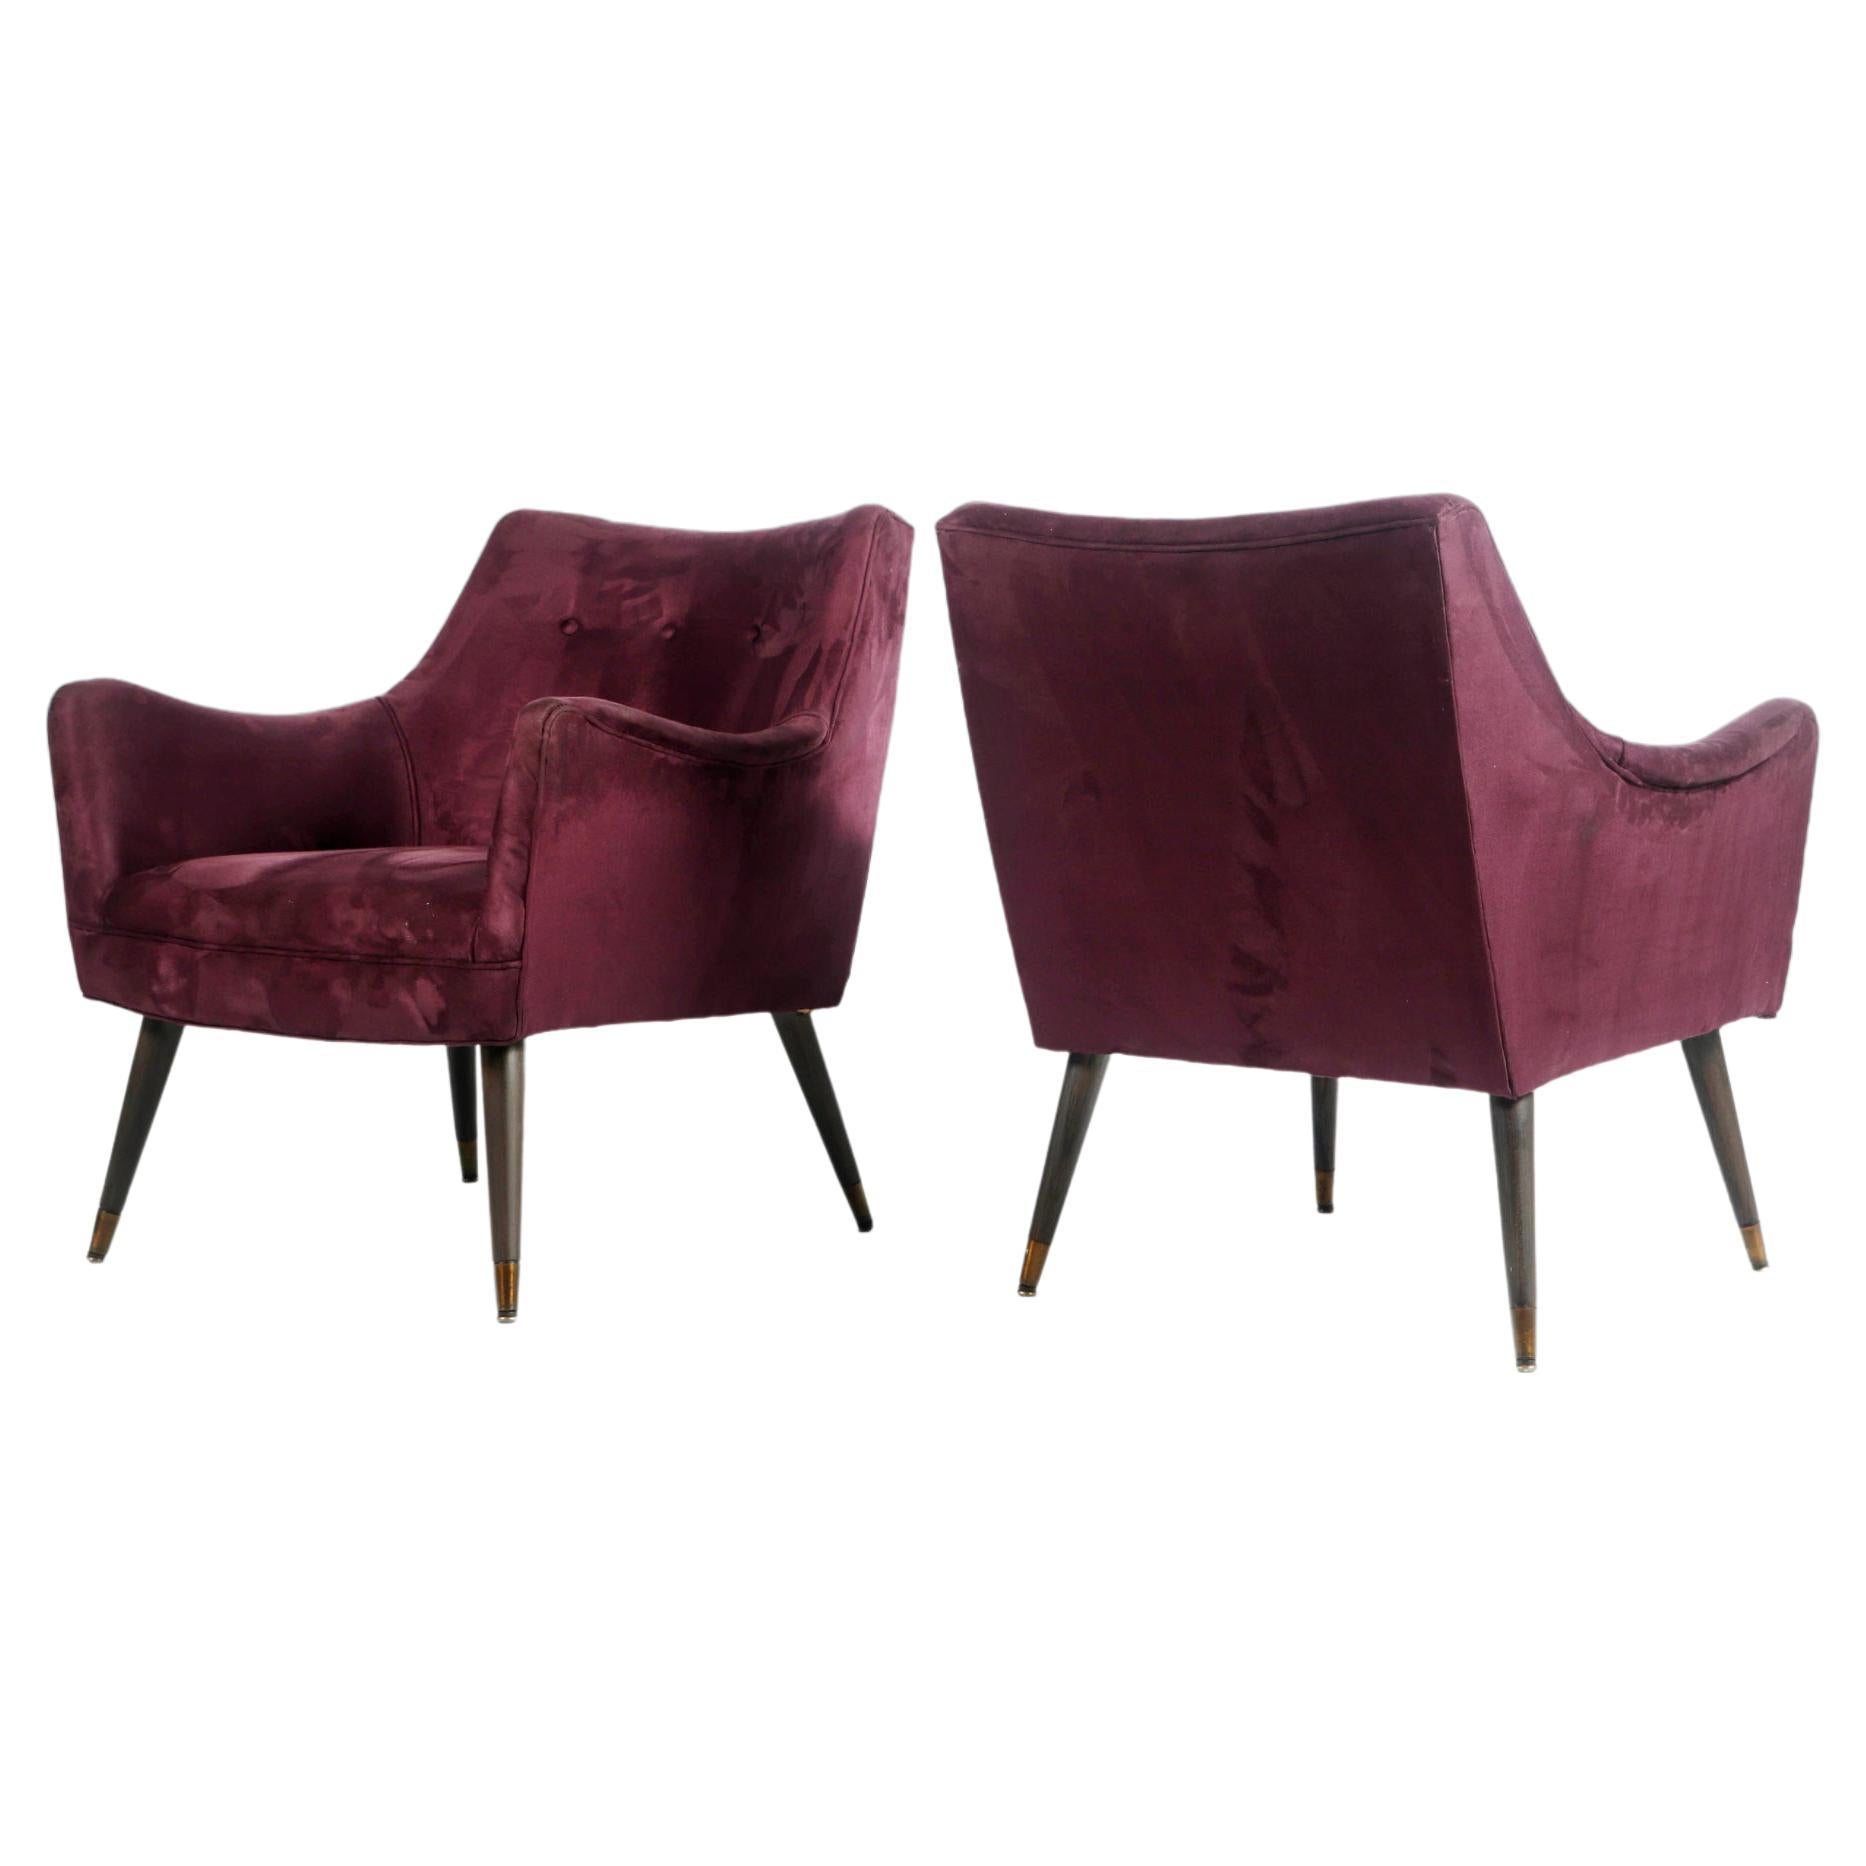 Pair of Mid Century Lounge Chairs in Original Purple Fabric After Paul McCobb